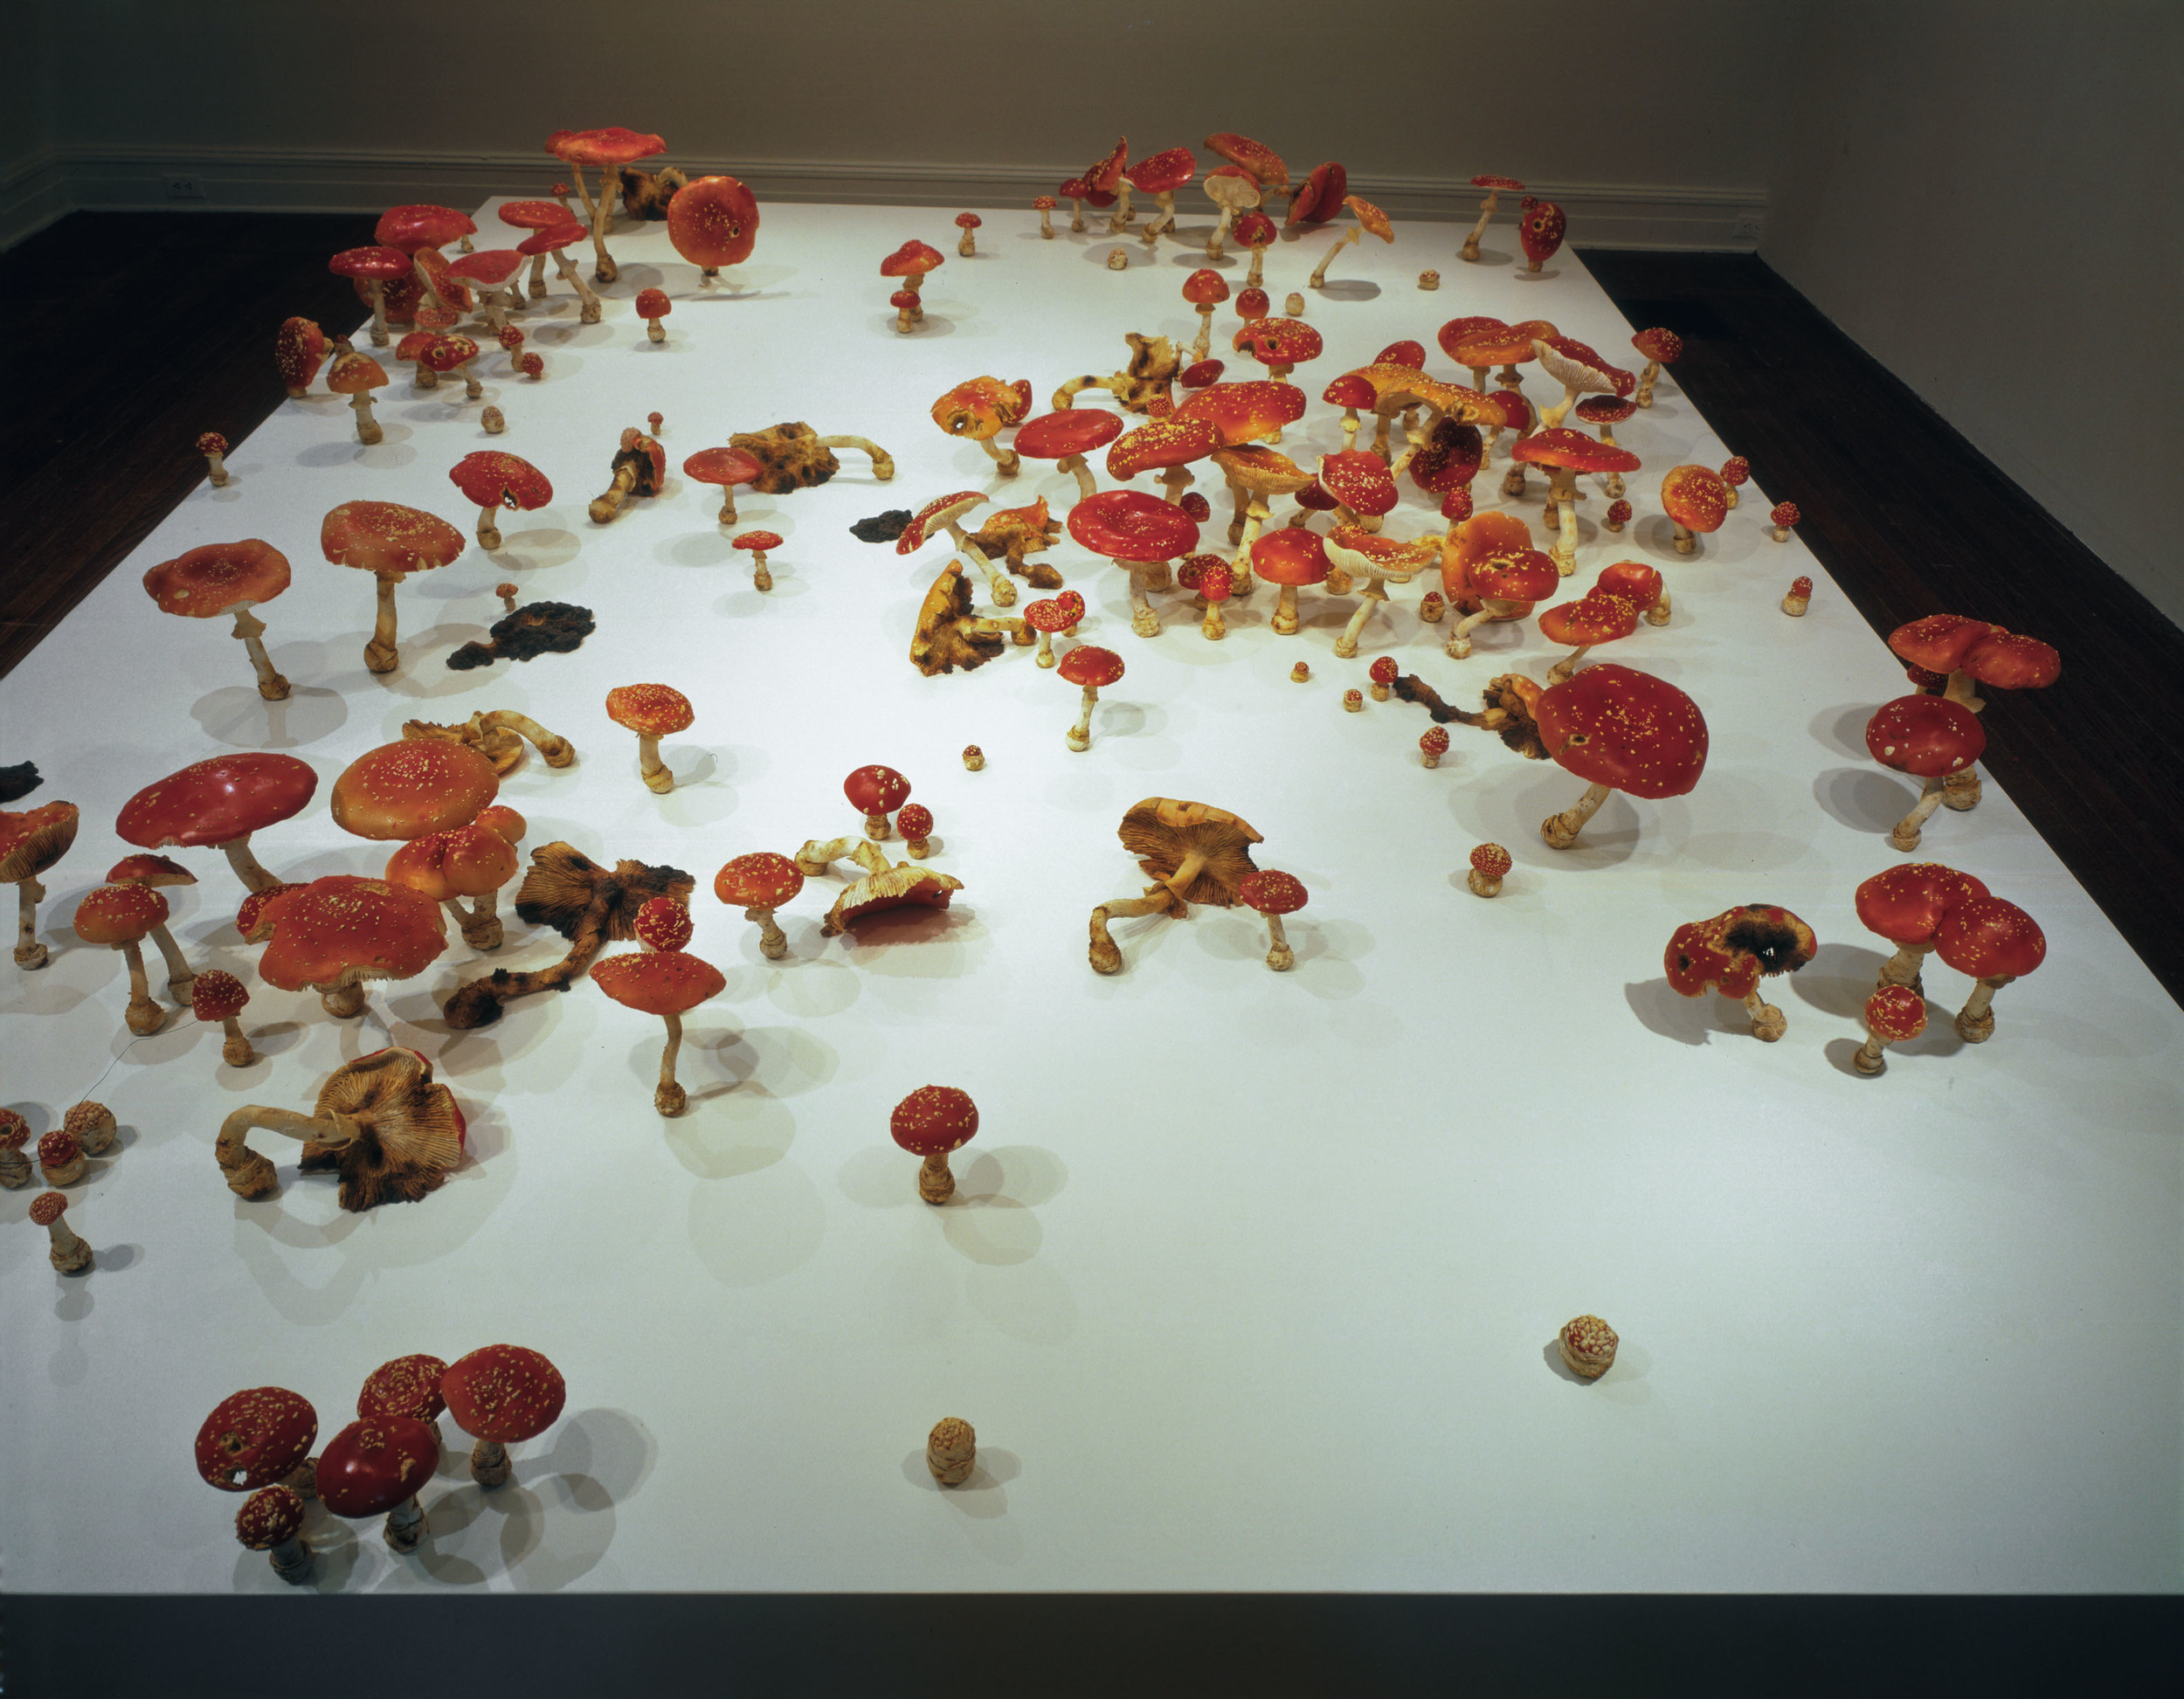  Amanita Muscaria Field, 2000, Thermoset polymer, epoxy, stainless steel, lacquer, and oil paint, 162 x 115 x 20 inches 